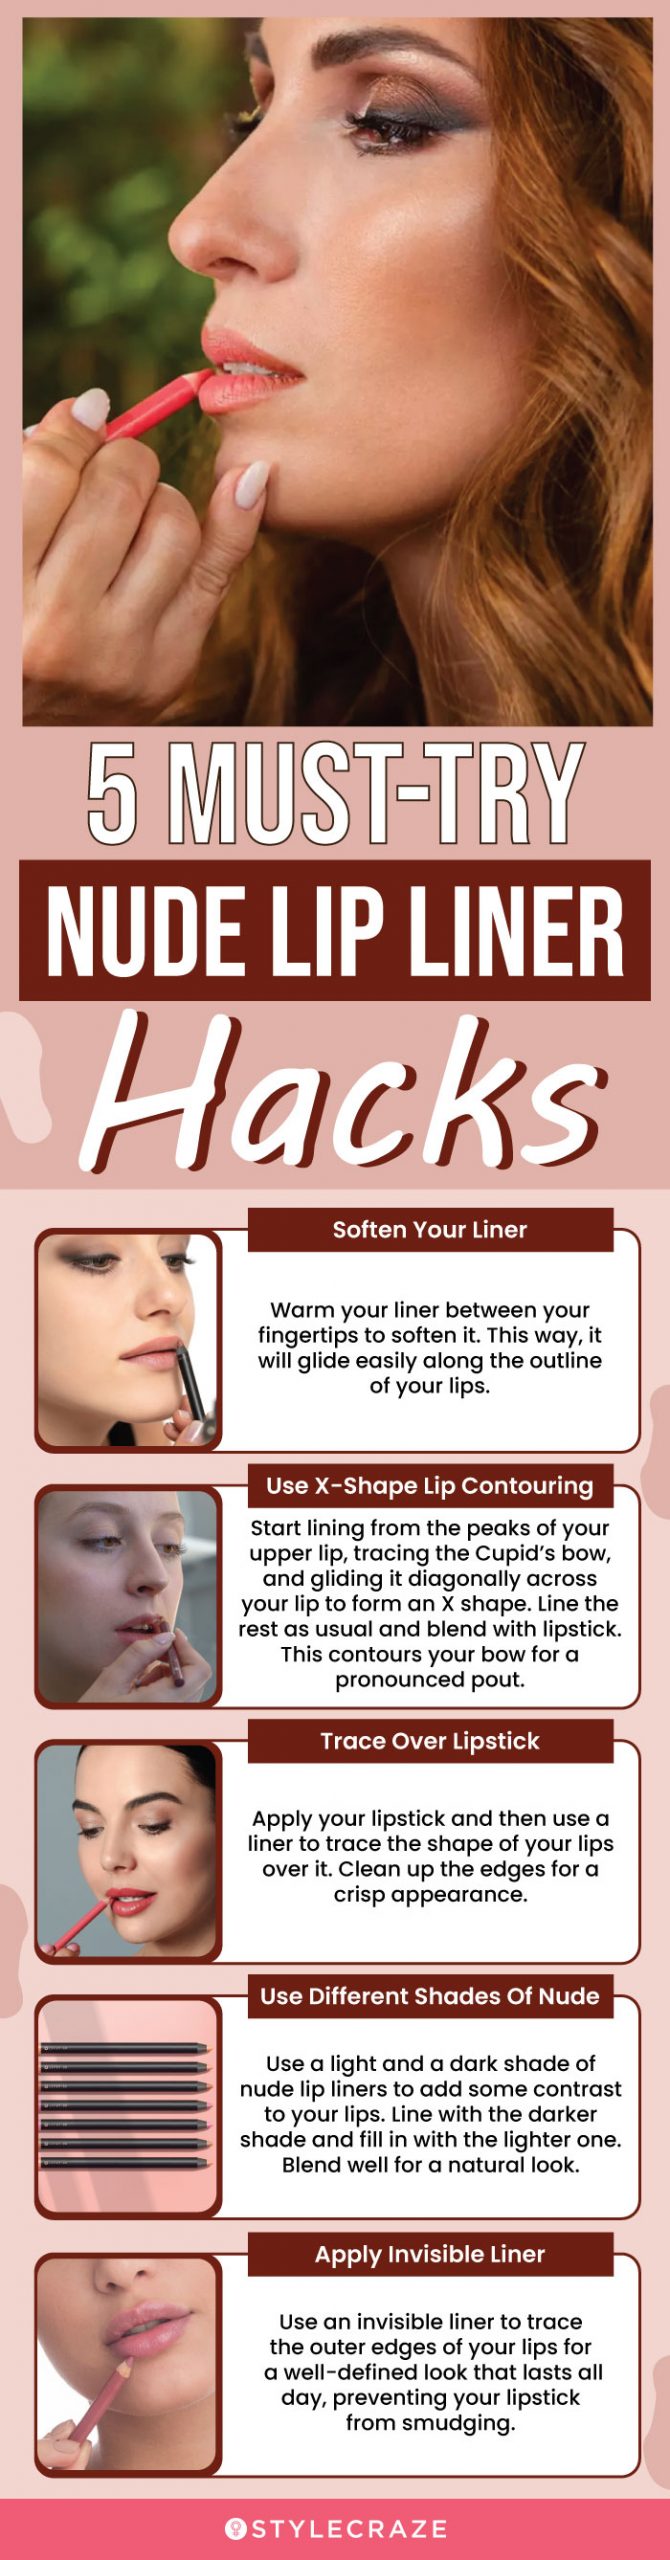 5 Must-Try Nude Lip Liner Hacks (infographic)